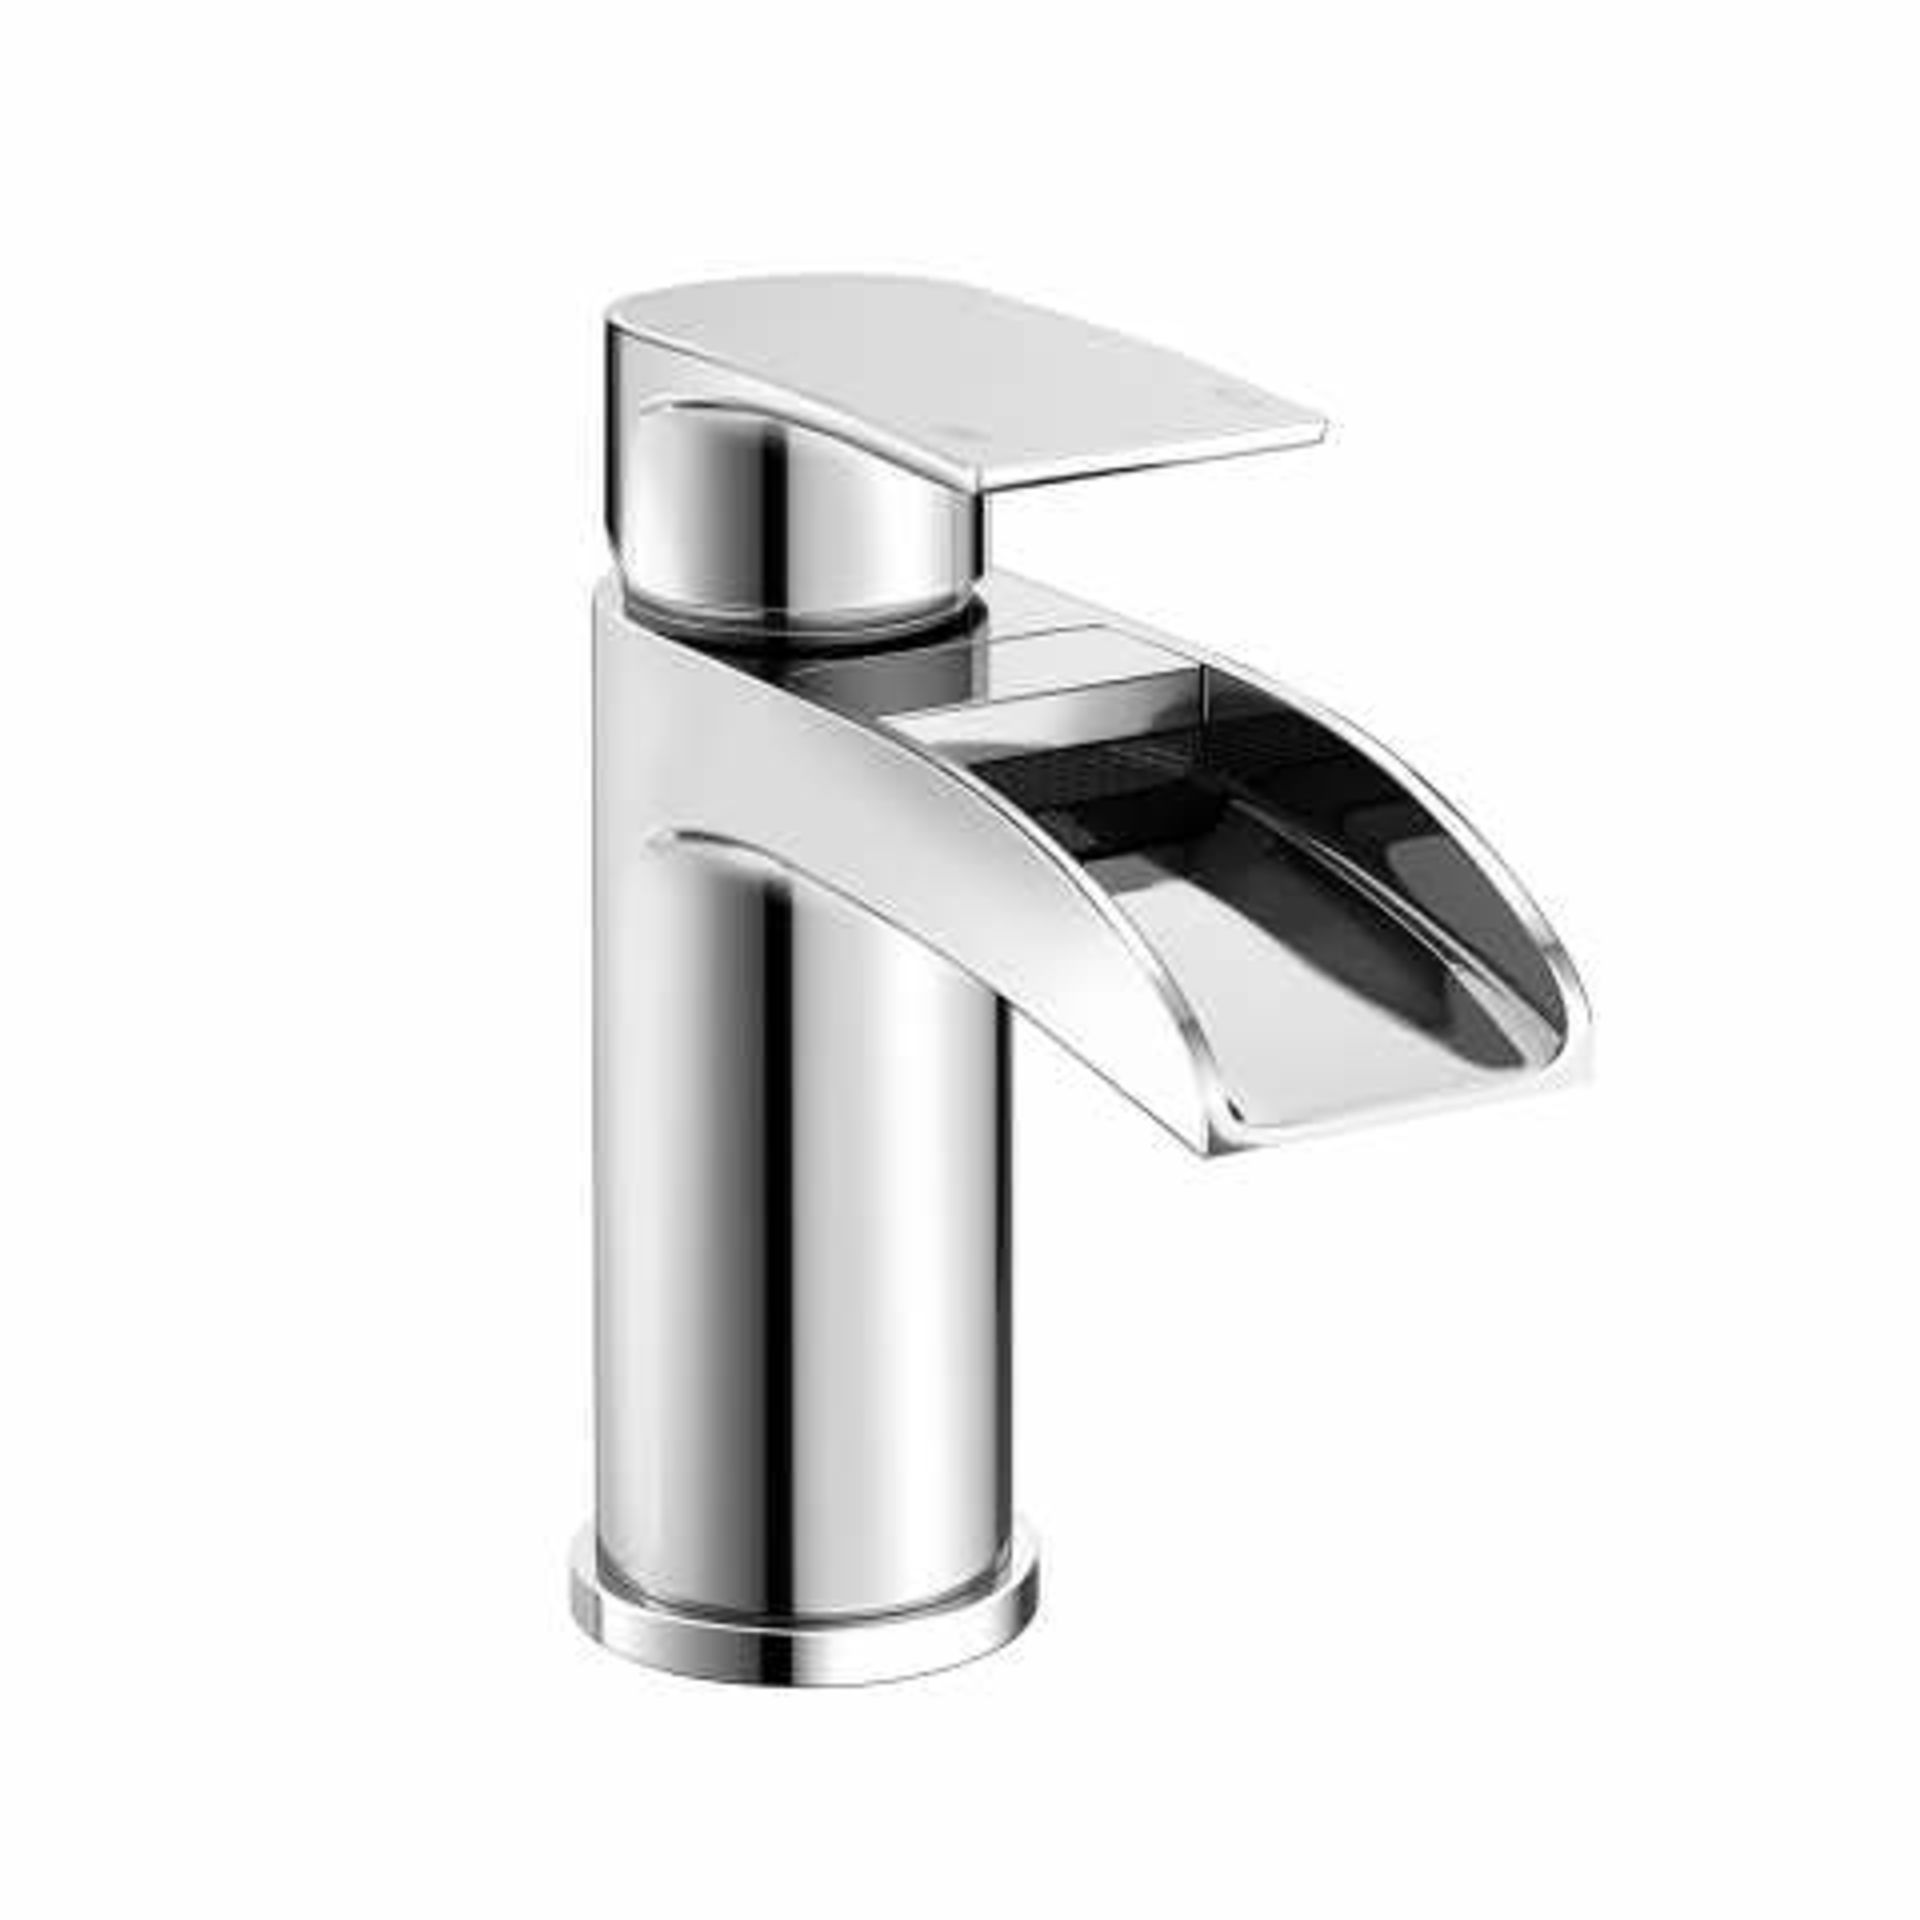 (H115) Avis II Waterfall Basin Mixer Tap Waterfall Feature Our range of waterfall taps add a touch - Image 2 of 4